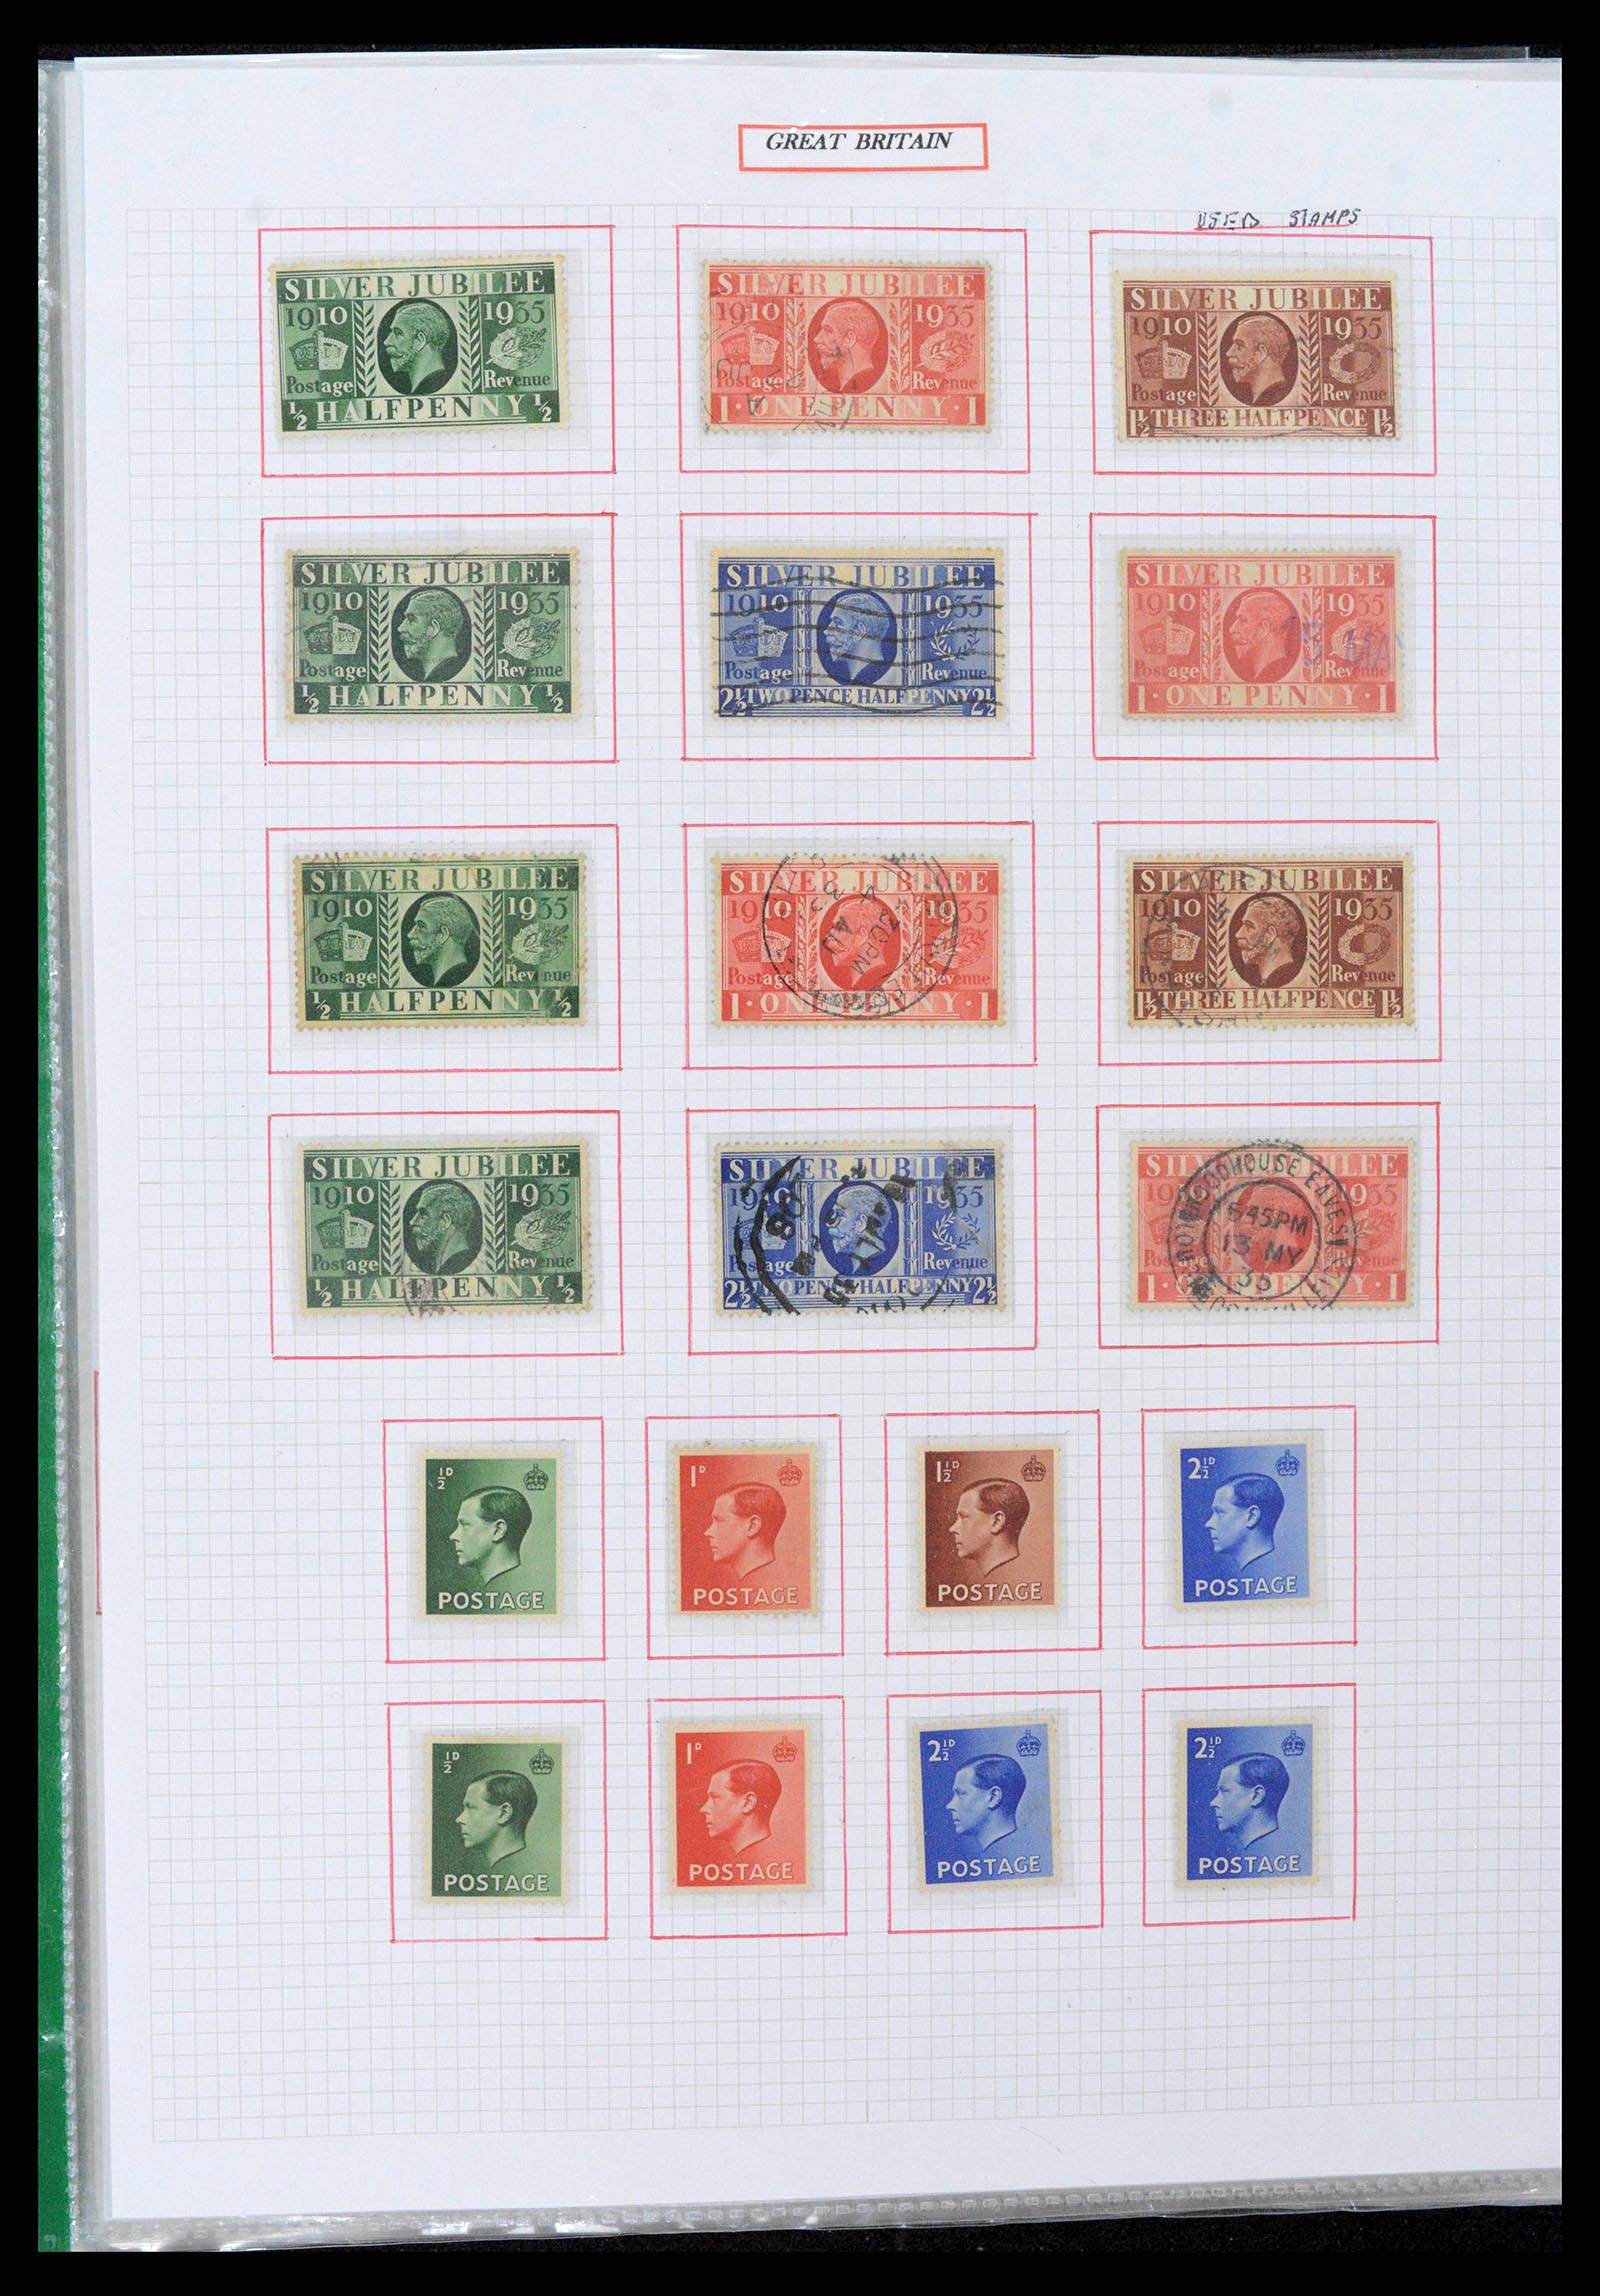 38253 0003 - Stamp collection 38253 Great Britain 1912-2002.